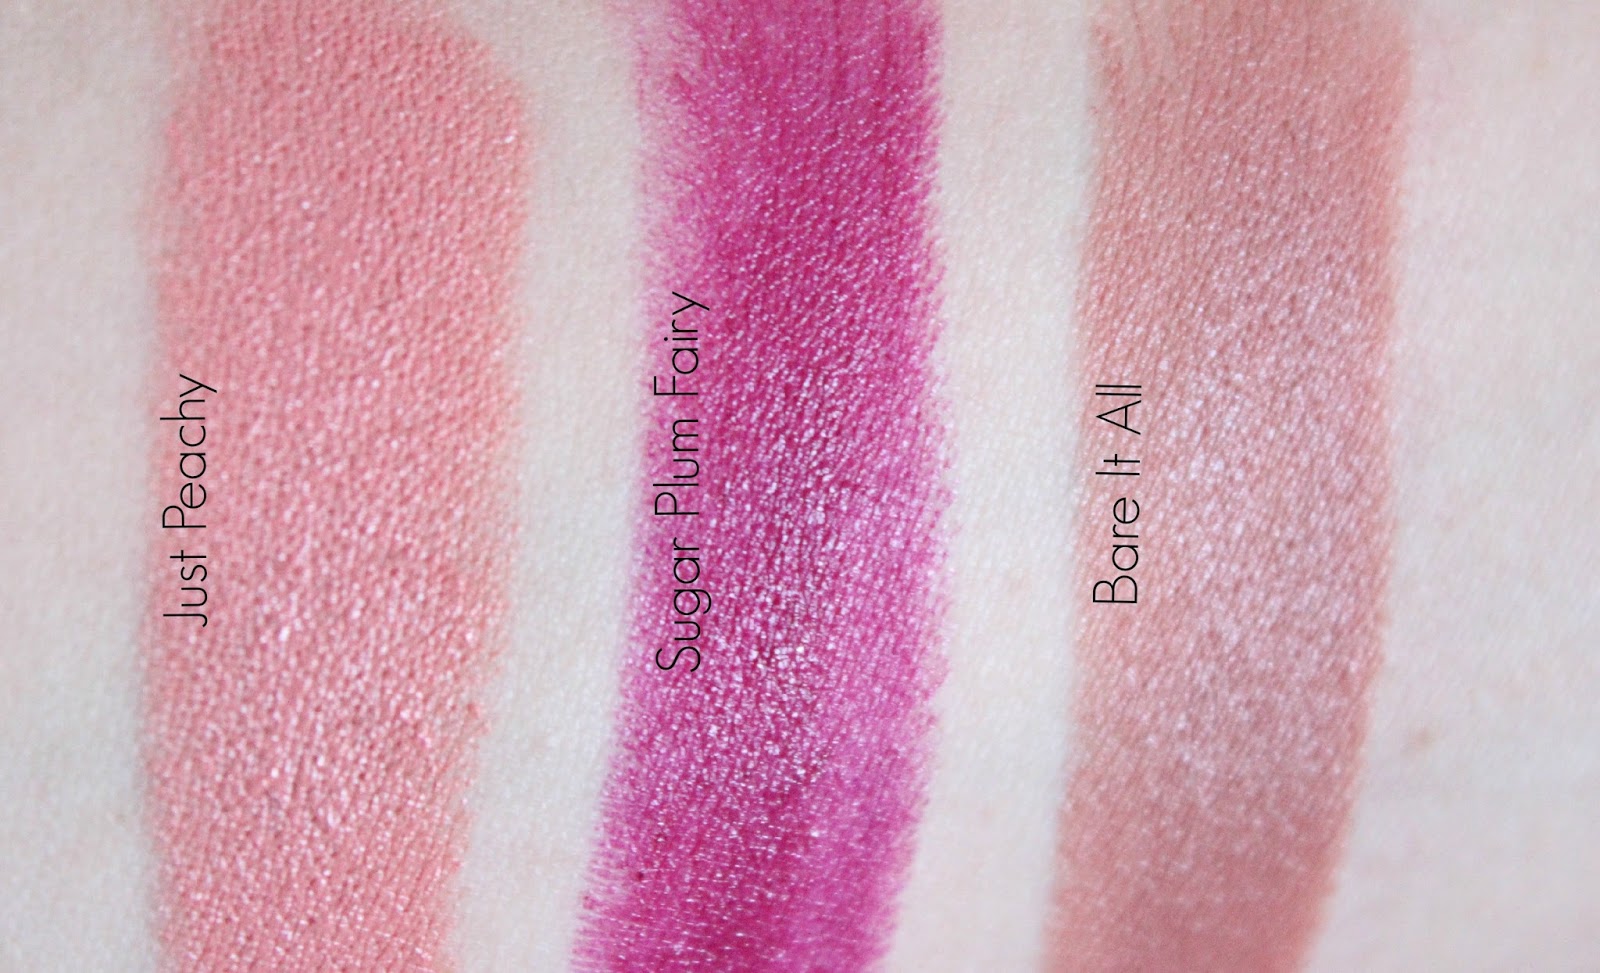 The $2 Most Duped Lipsticks | Wet n Wild Megalast Lipsticks in (L-R) Just Peachy, Sugar Plum Fairy and Bare It All.